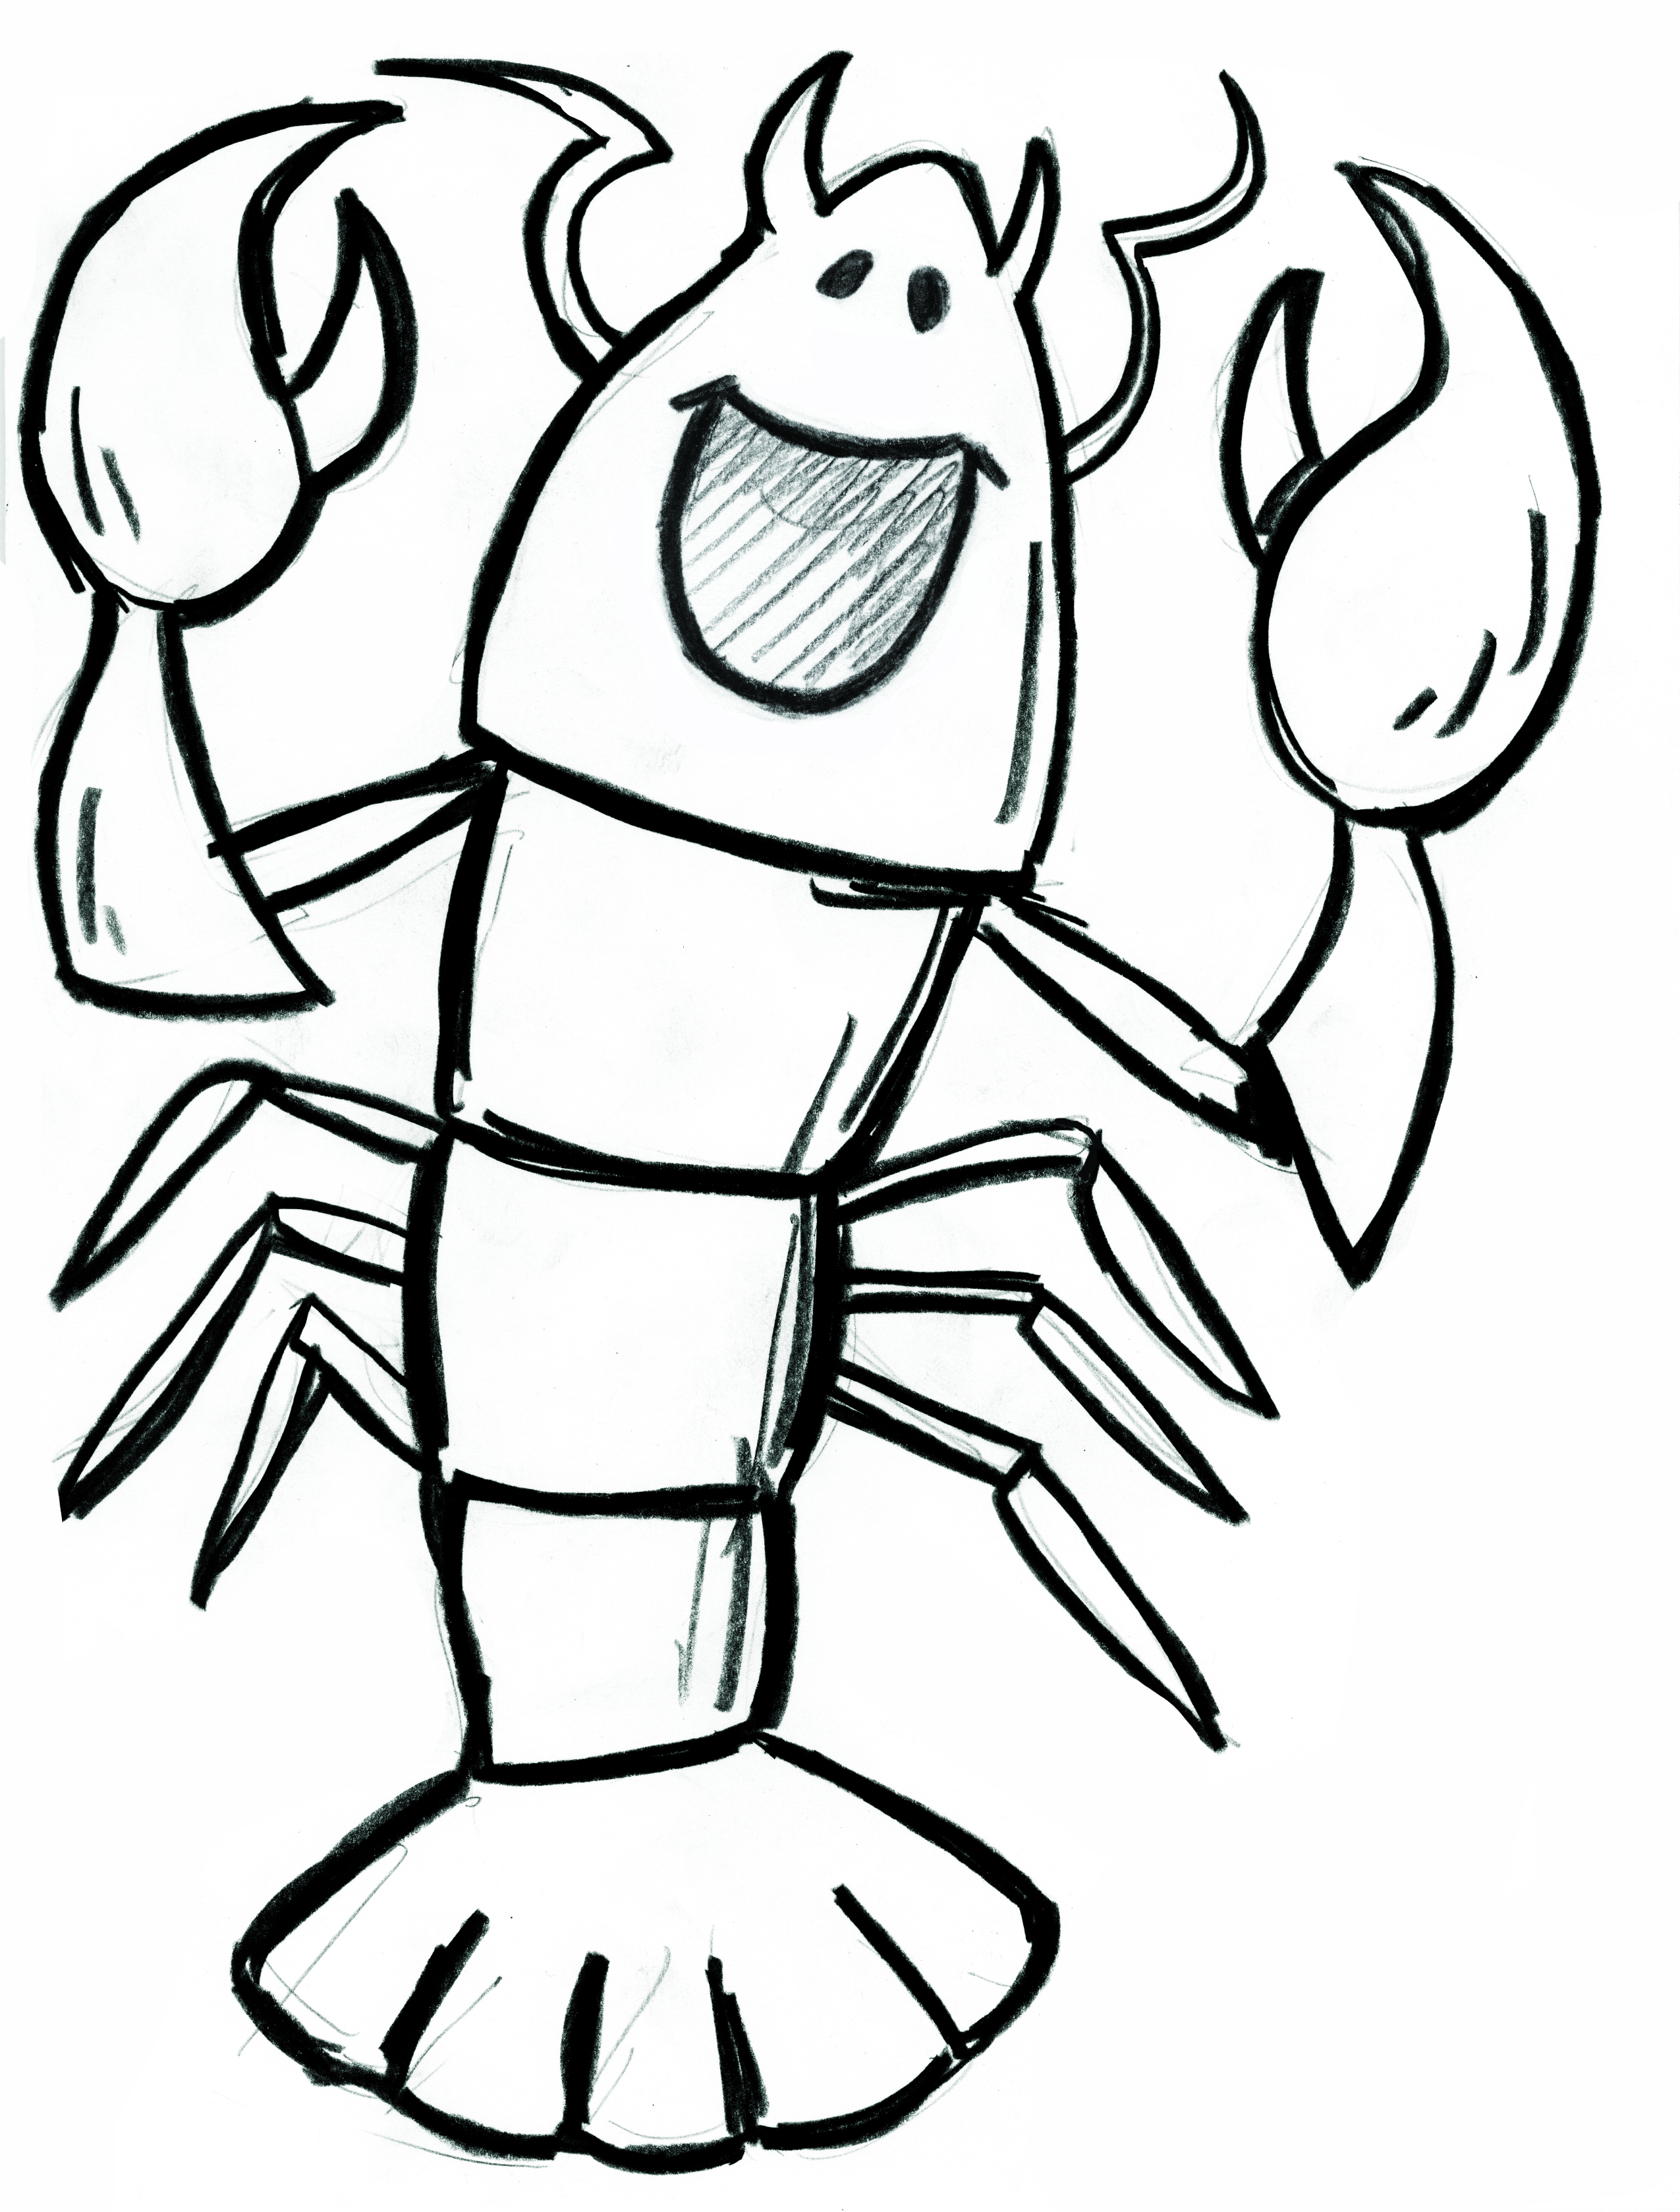 lobster cartoon black and white